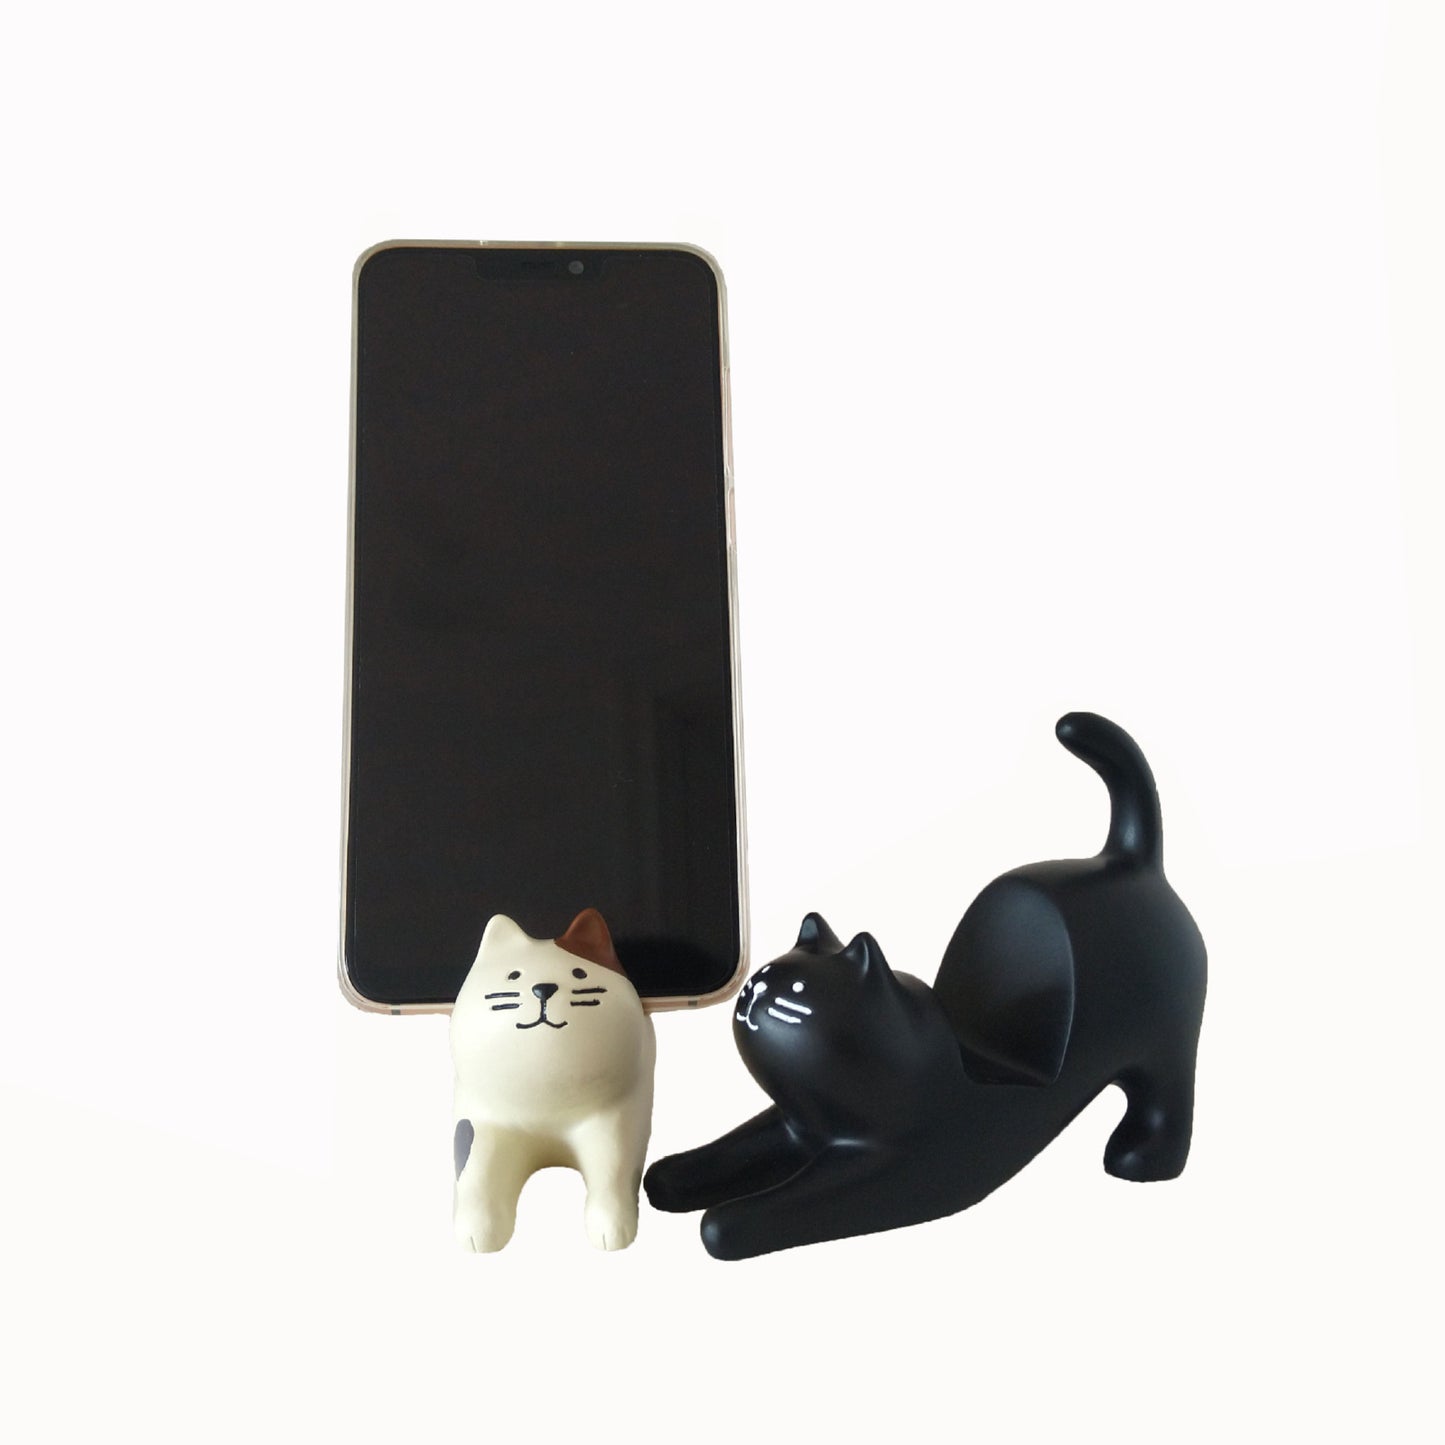 Japanese Stretching Cat Cell Phone Holder White 5*8.5*10.5cm